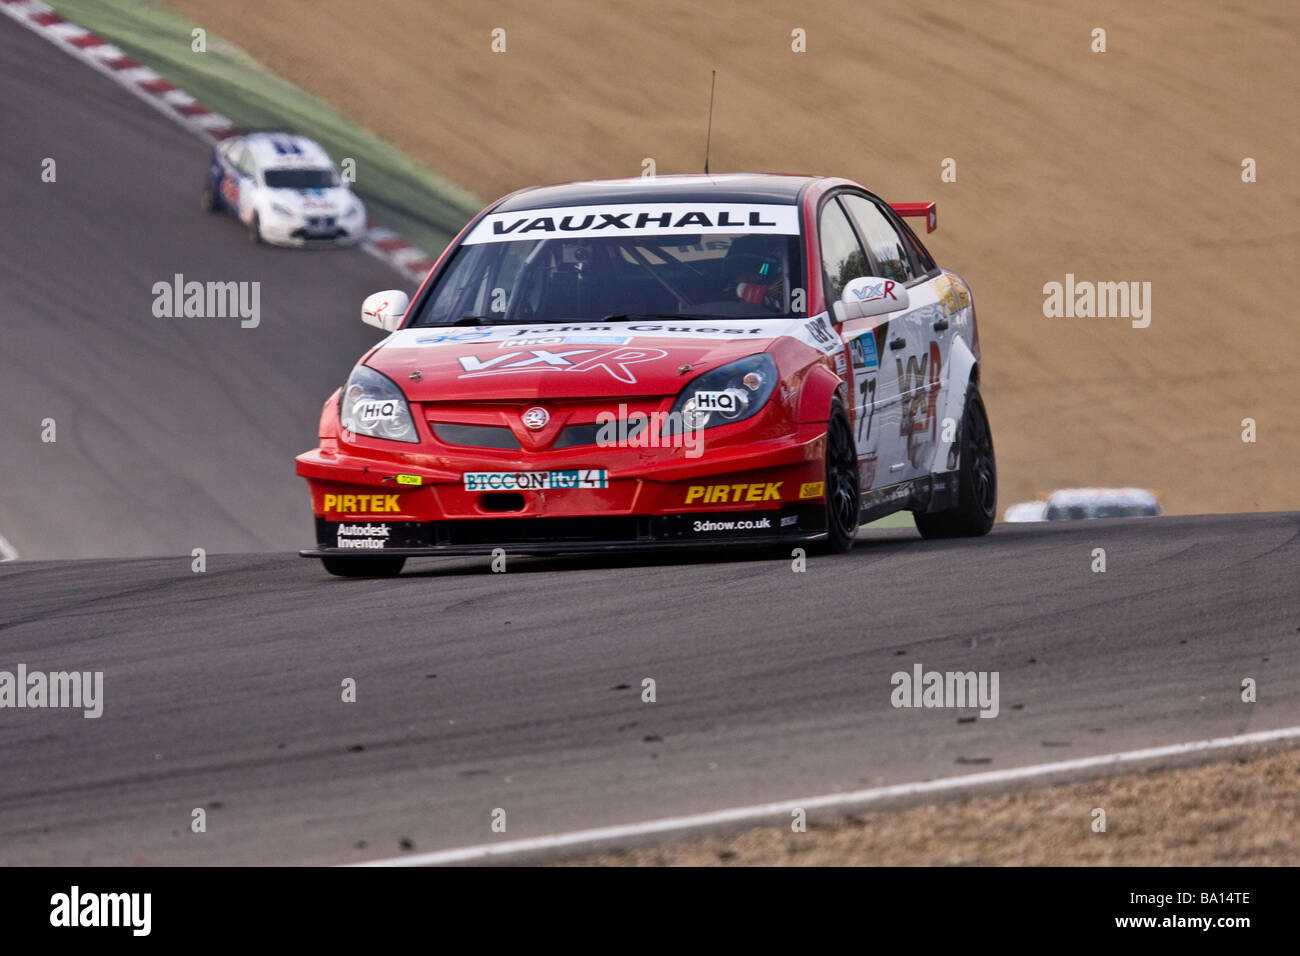 Andrew Jordon at druids bend in the Vauxhall Stock Photo